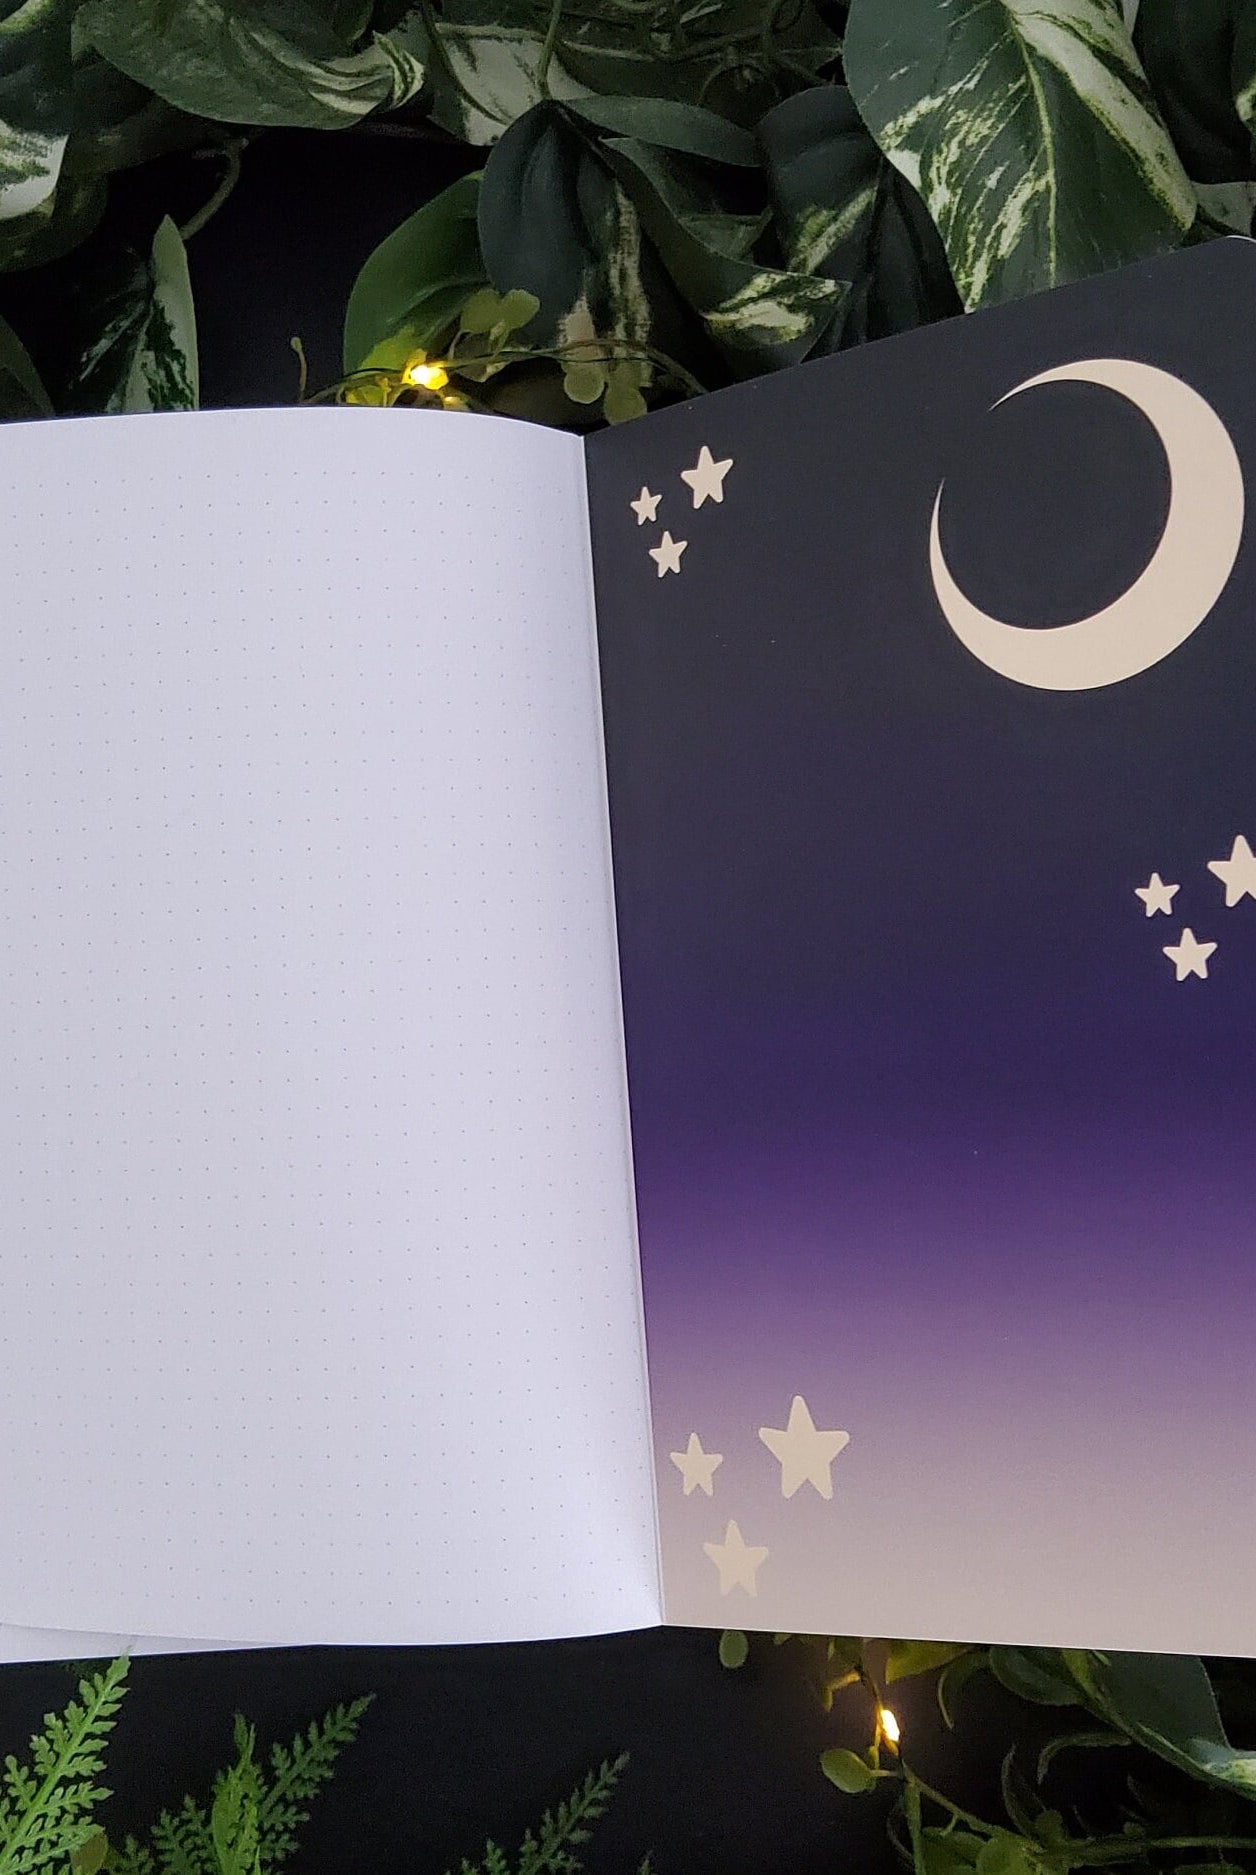 LAYFLAT NOTEBOOK: White Witch Moth and Moon with DOT Grid Pages , White Witch Moth , Witch Moth Art , Witch Moth Notebook